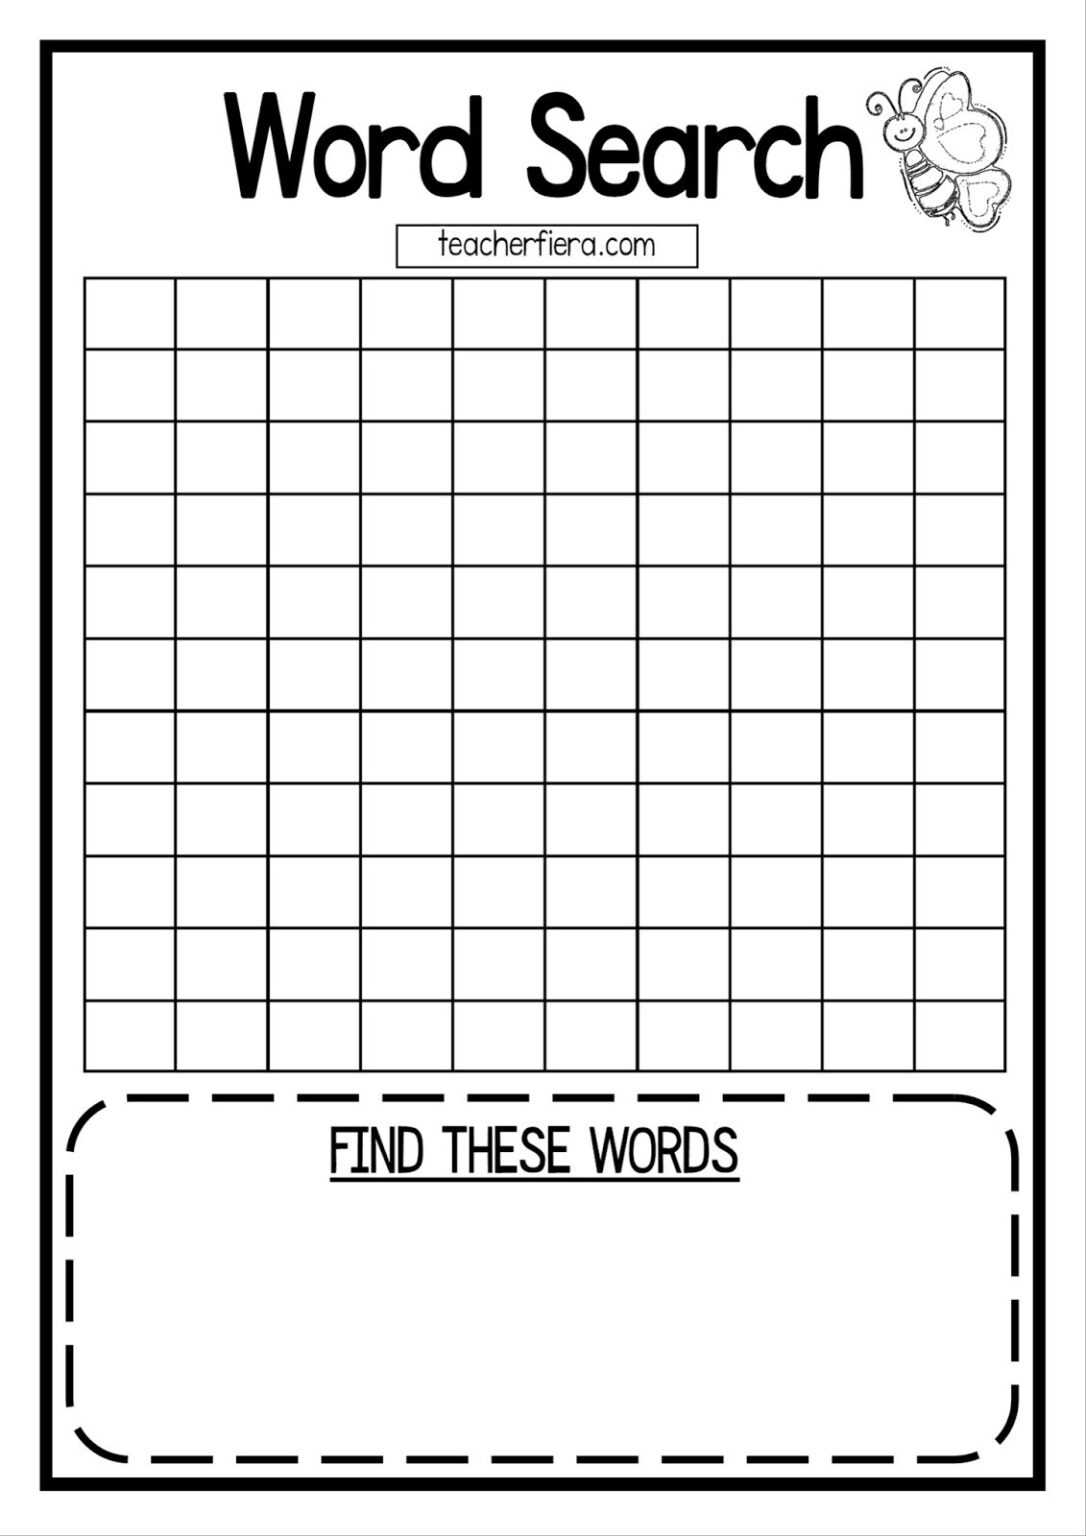 Create Your Own Word Search Puzzle Free Printable Mazsynergy